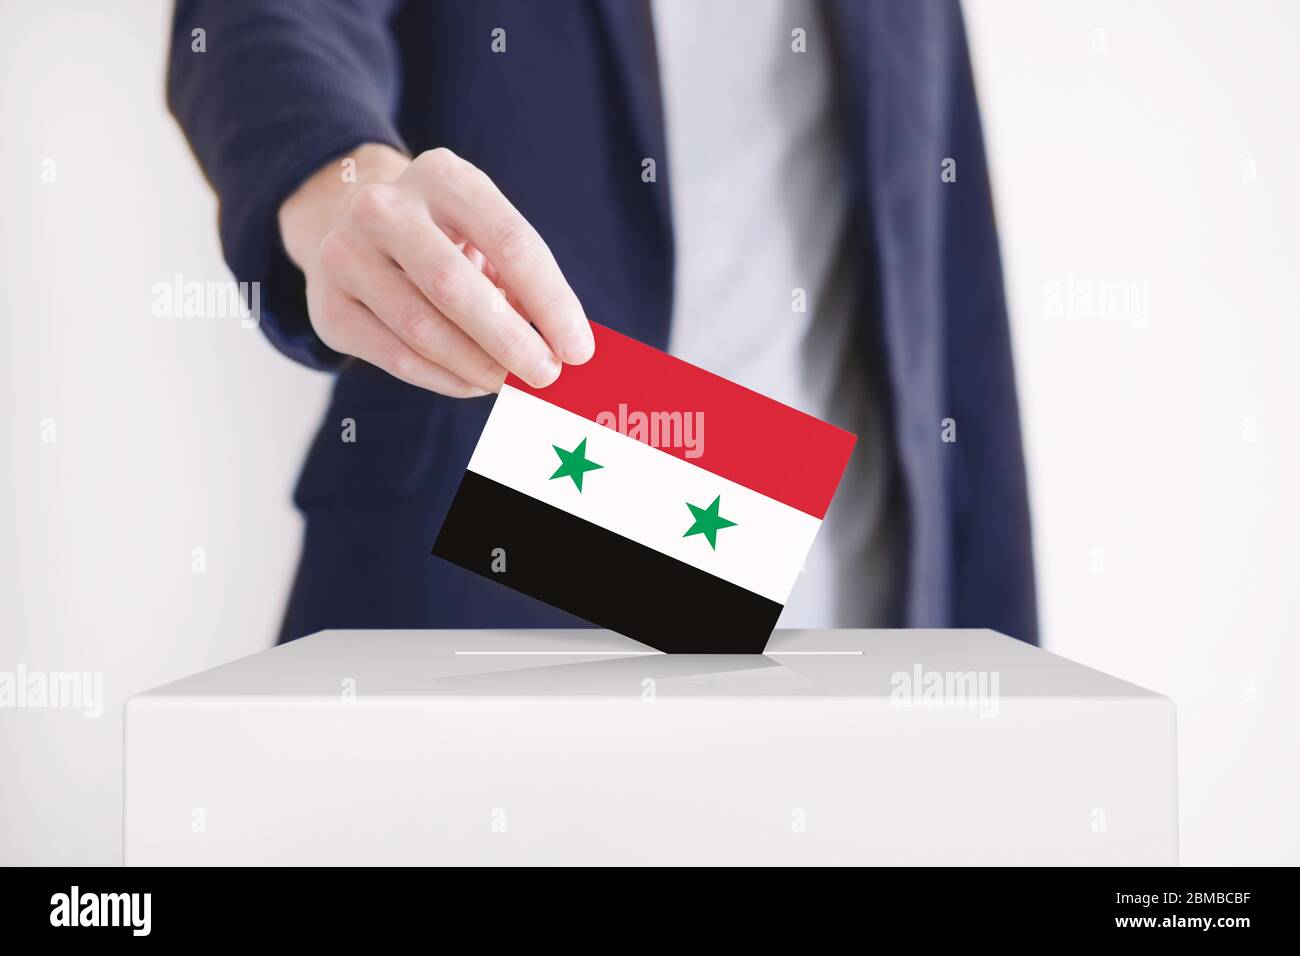 Man putting a ballot with Syrian flag into a voting box. Stock Photo